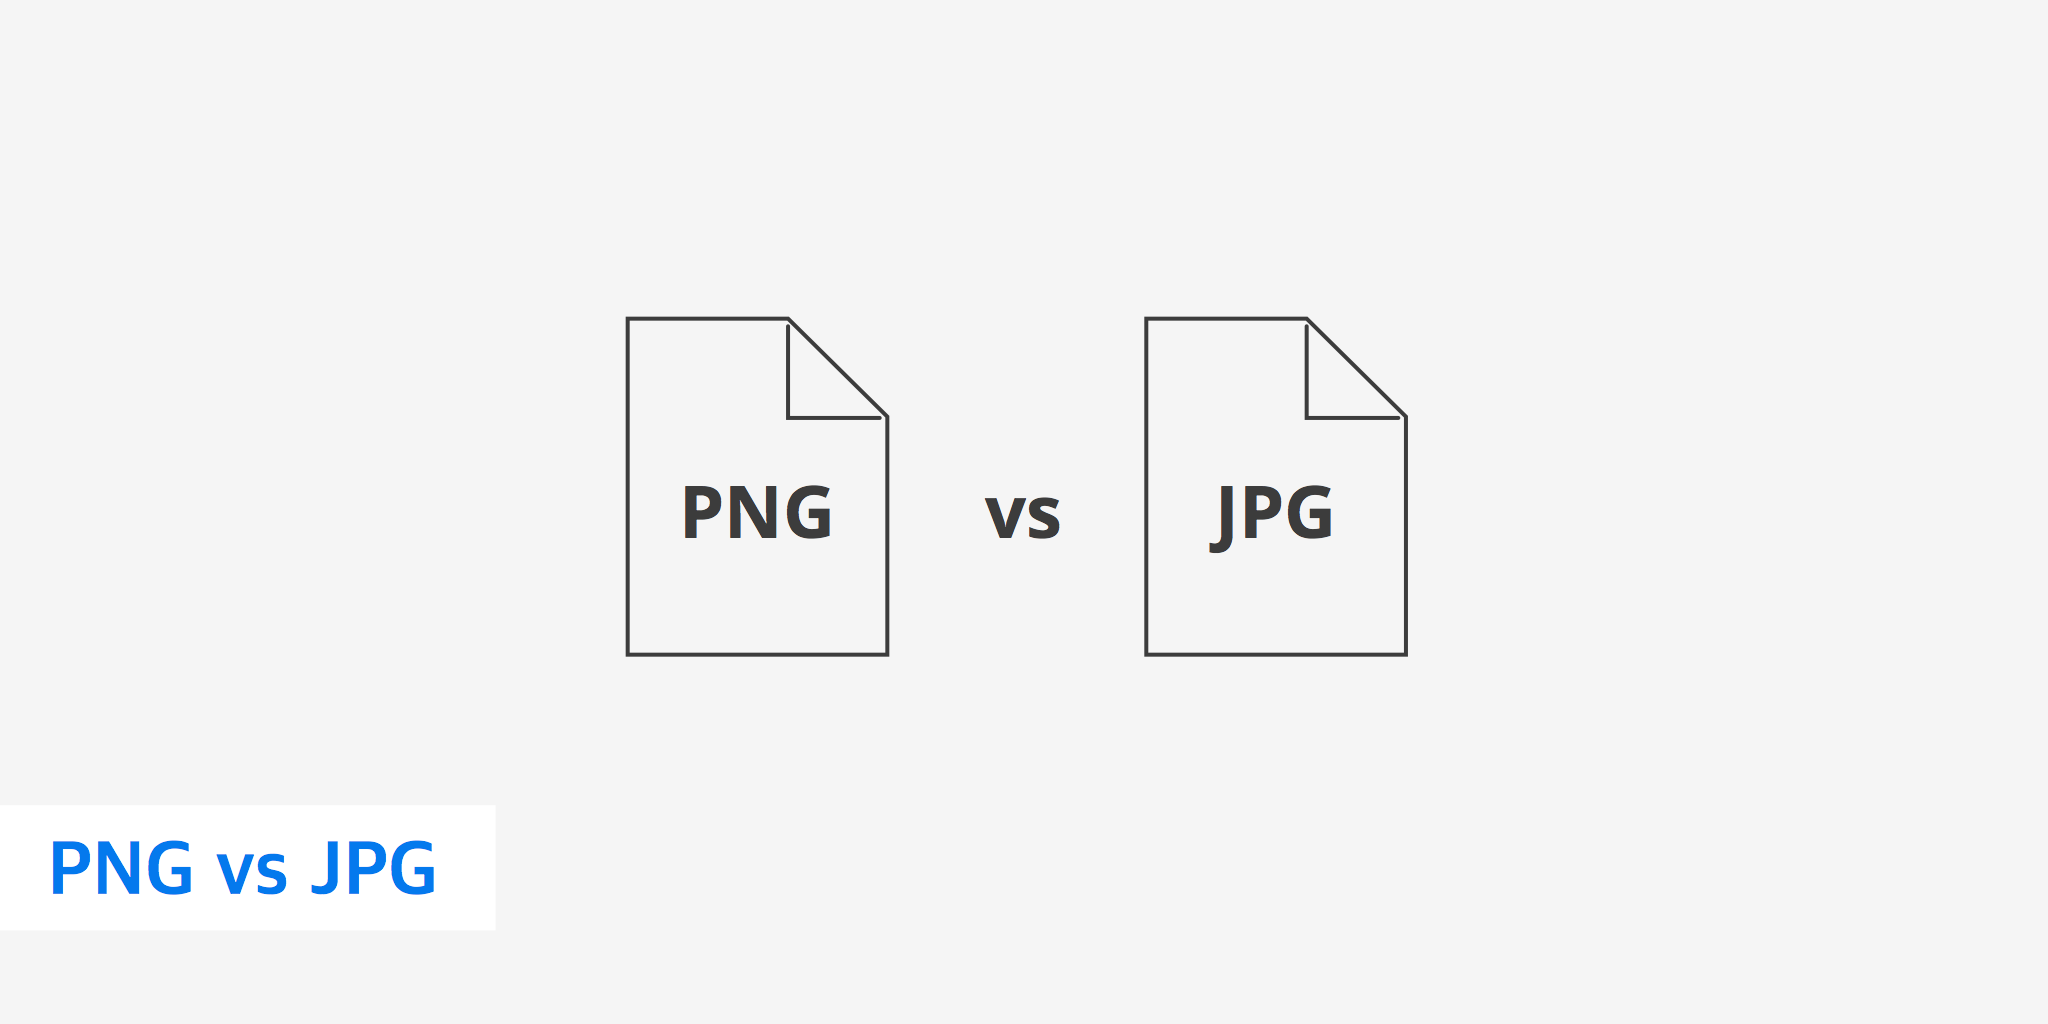 PNG vs JPG Images - What Is the Difference?